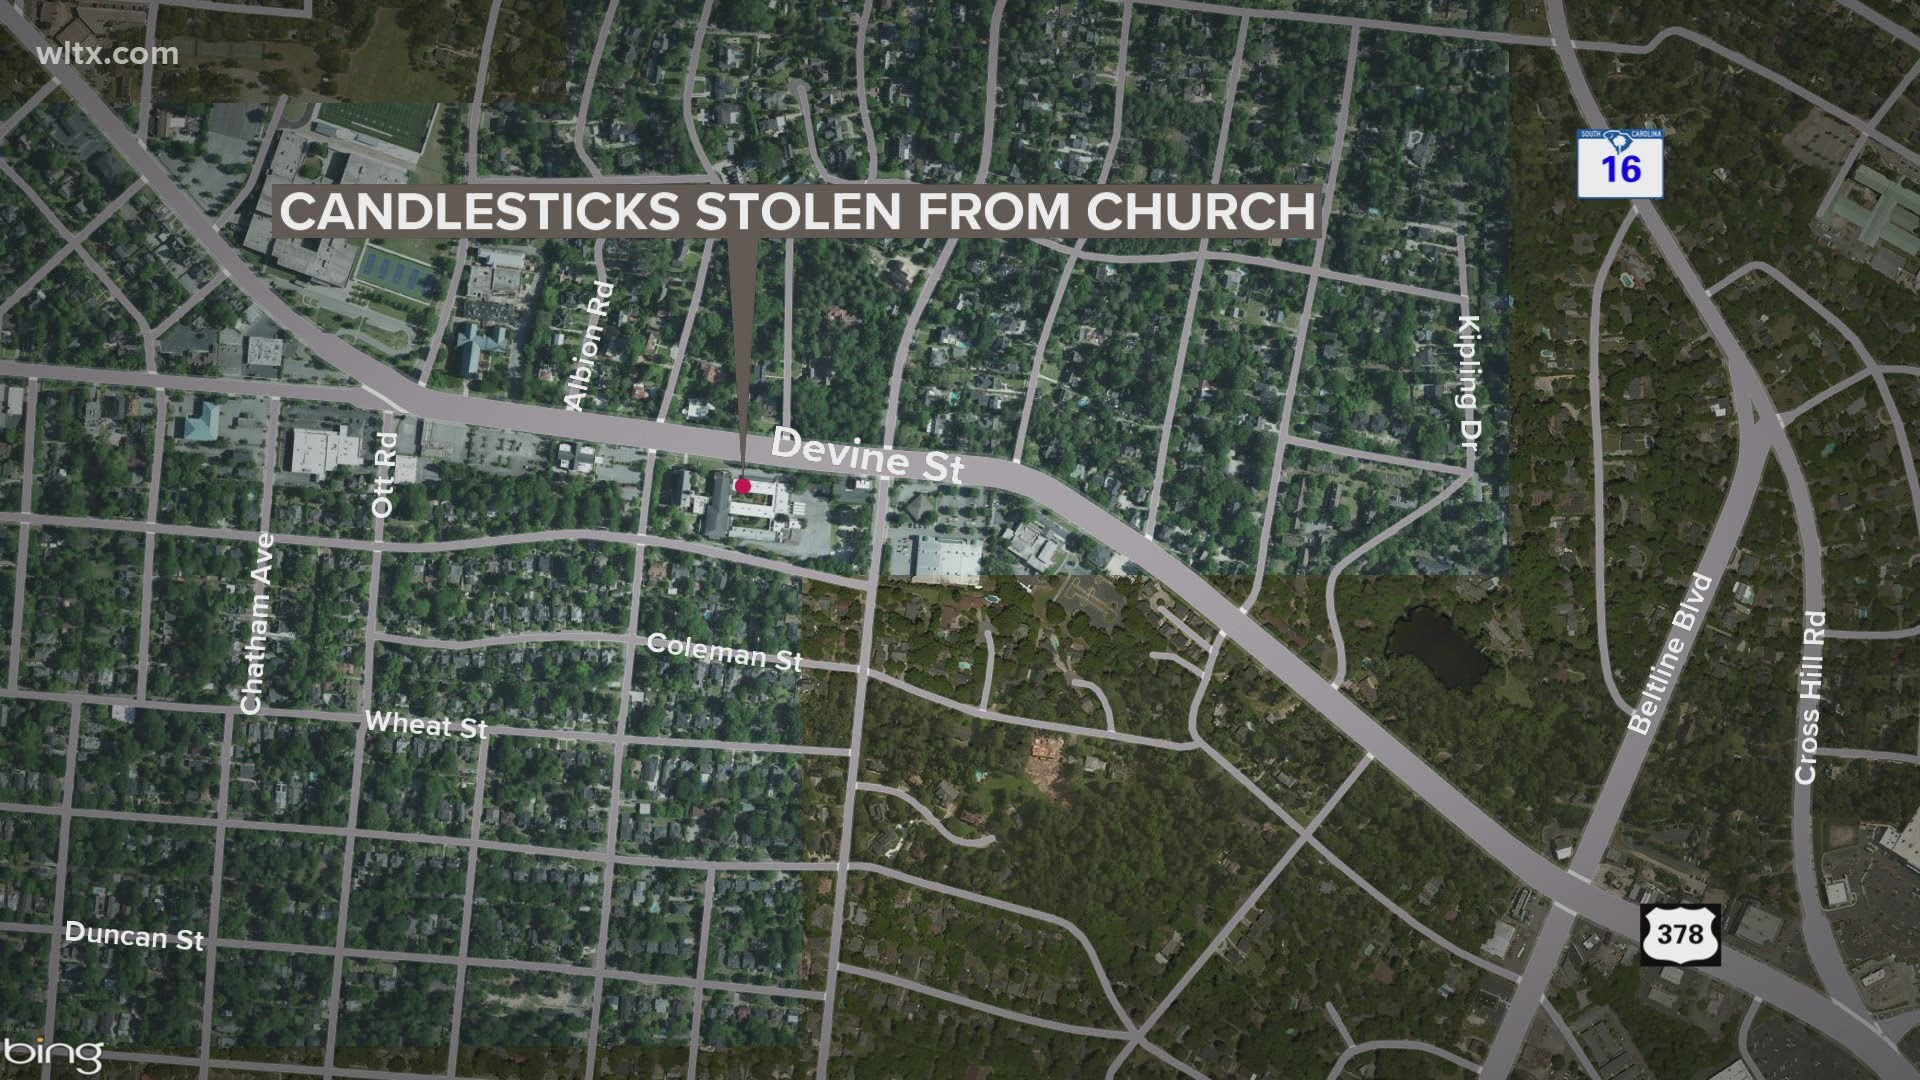 Two people have been arrested in connection to a theft at St. Joseph’s Catholic Church on Devine Street last month.